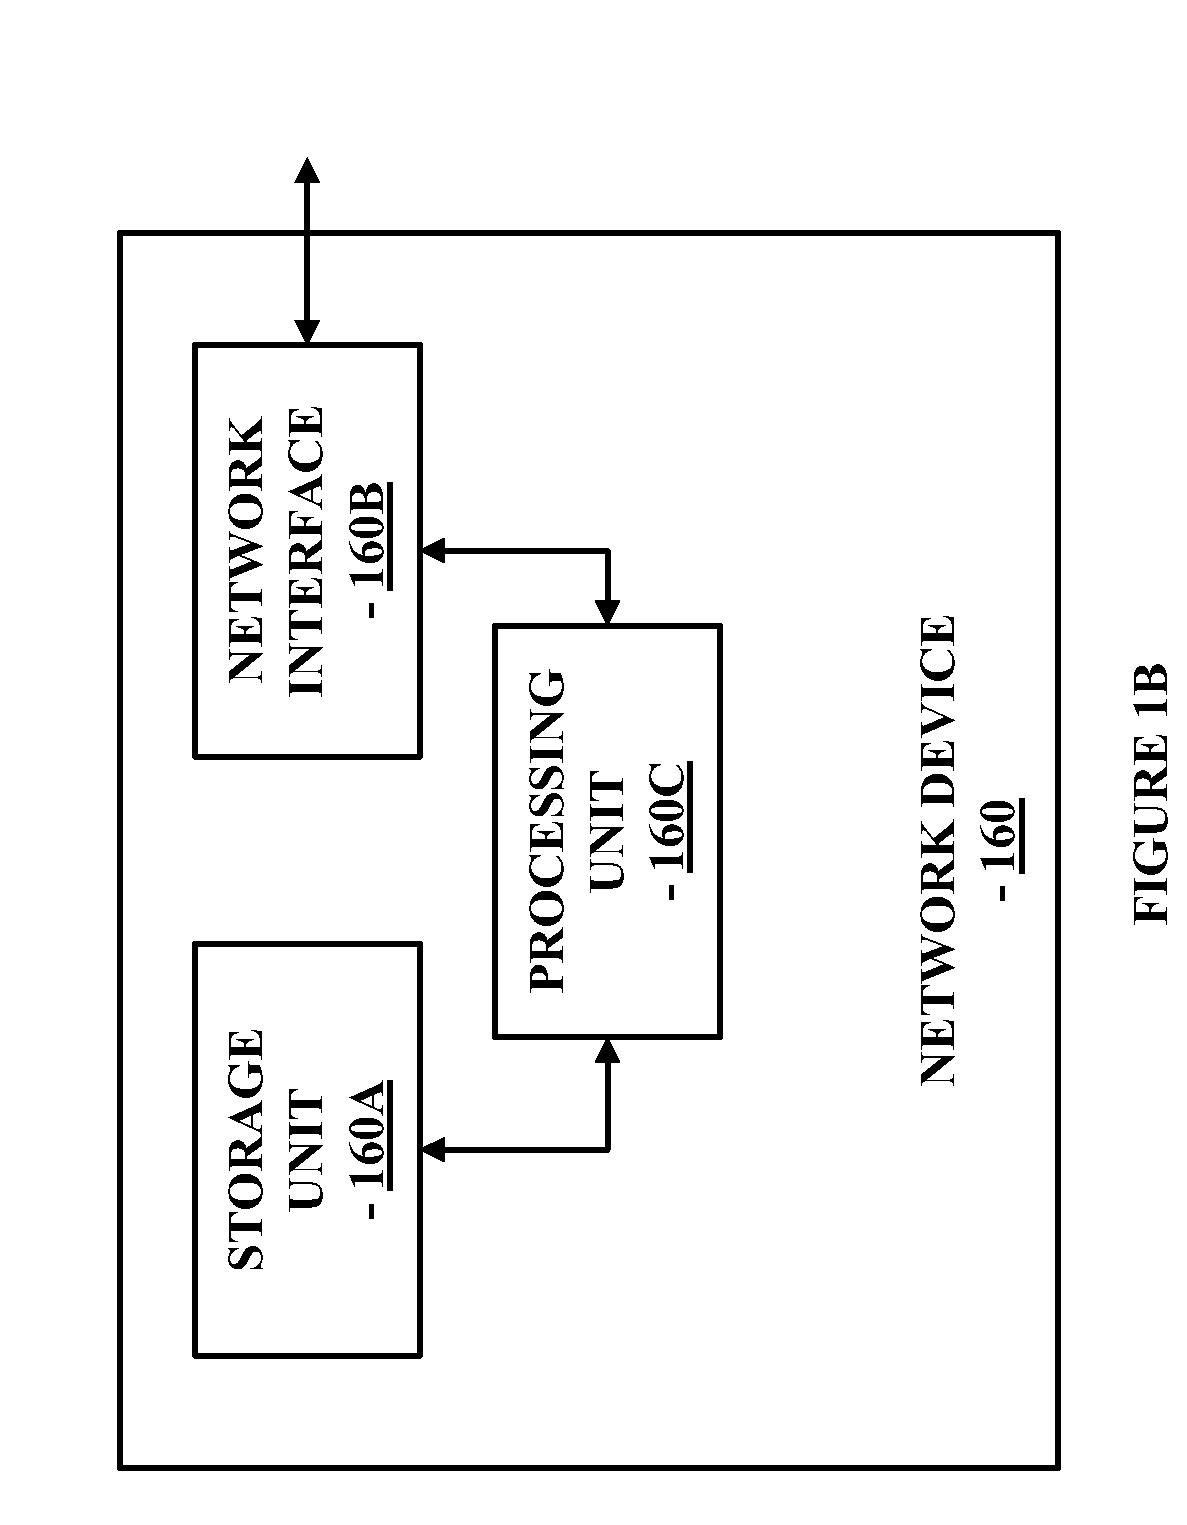 Method and system for providing connectivity outage detection for MPLS core networks based on service level agreement